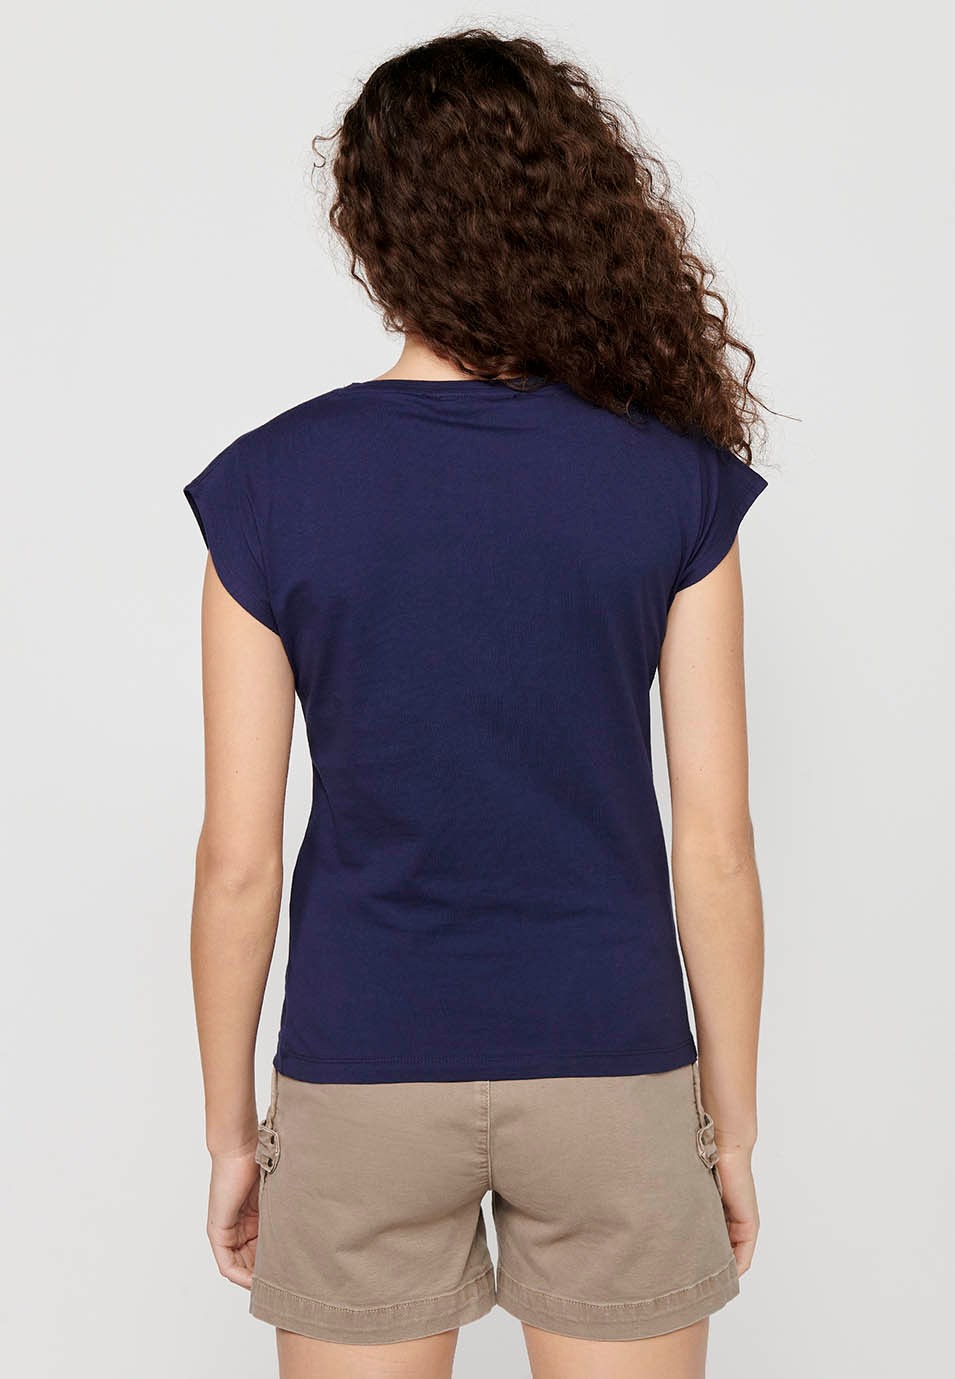 Short Sleeve T-shirt with Round Neck and Front Print in Navy Color for Women